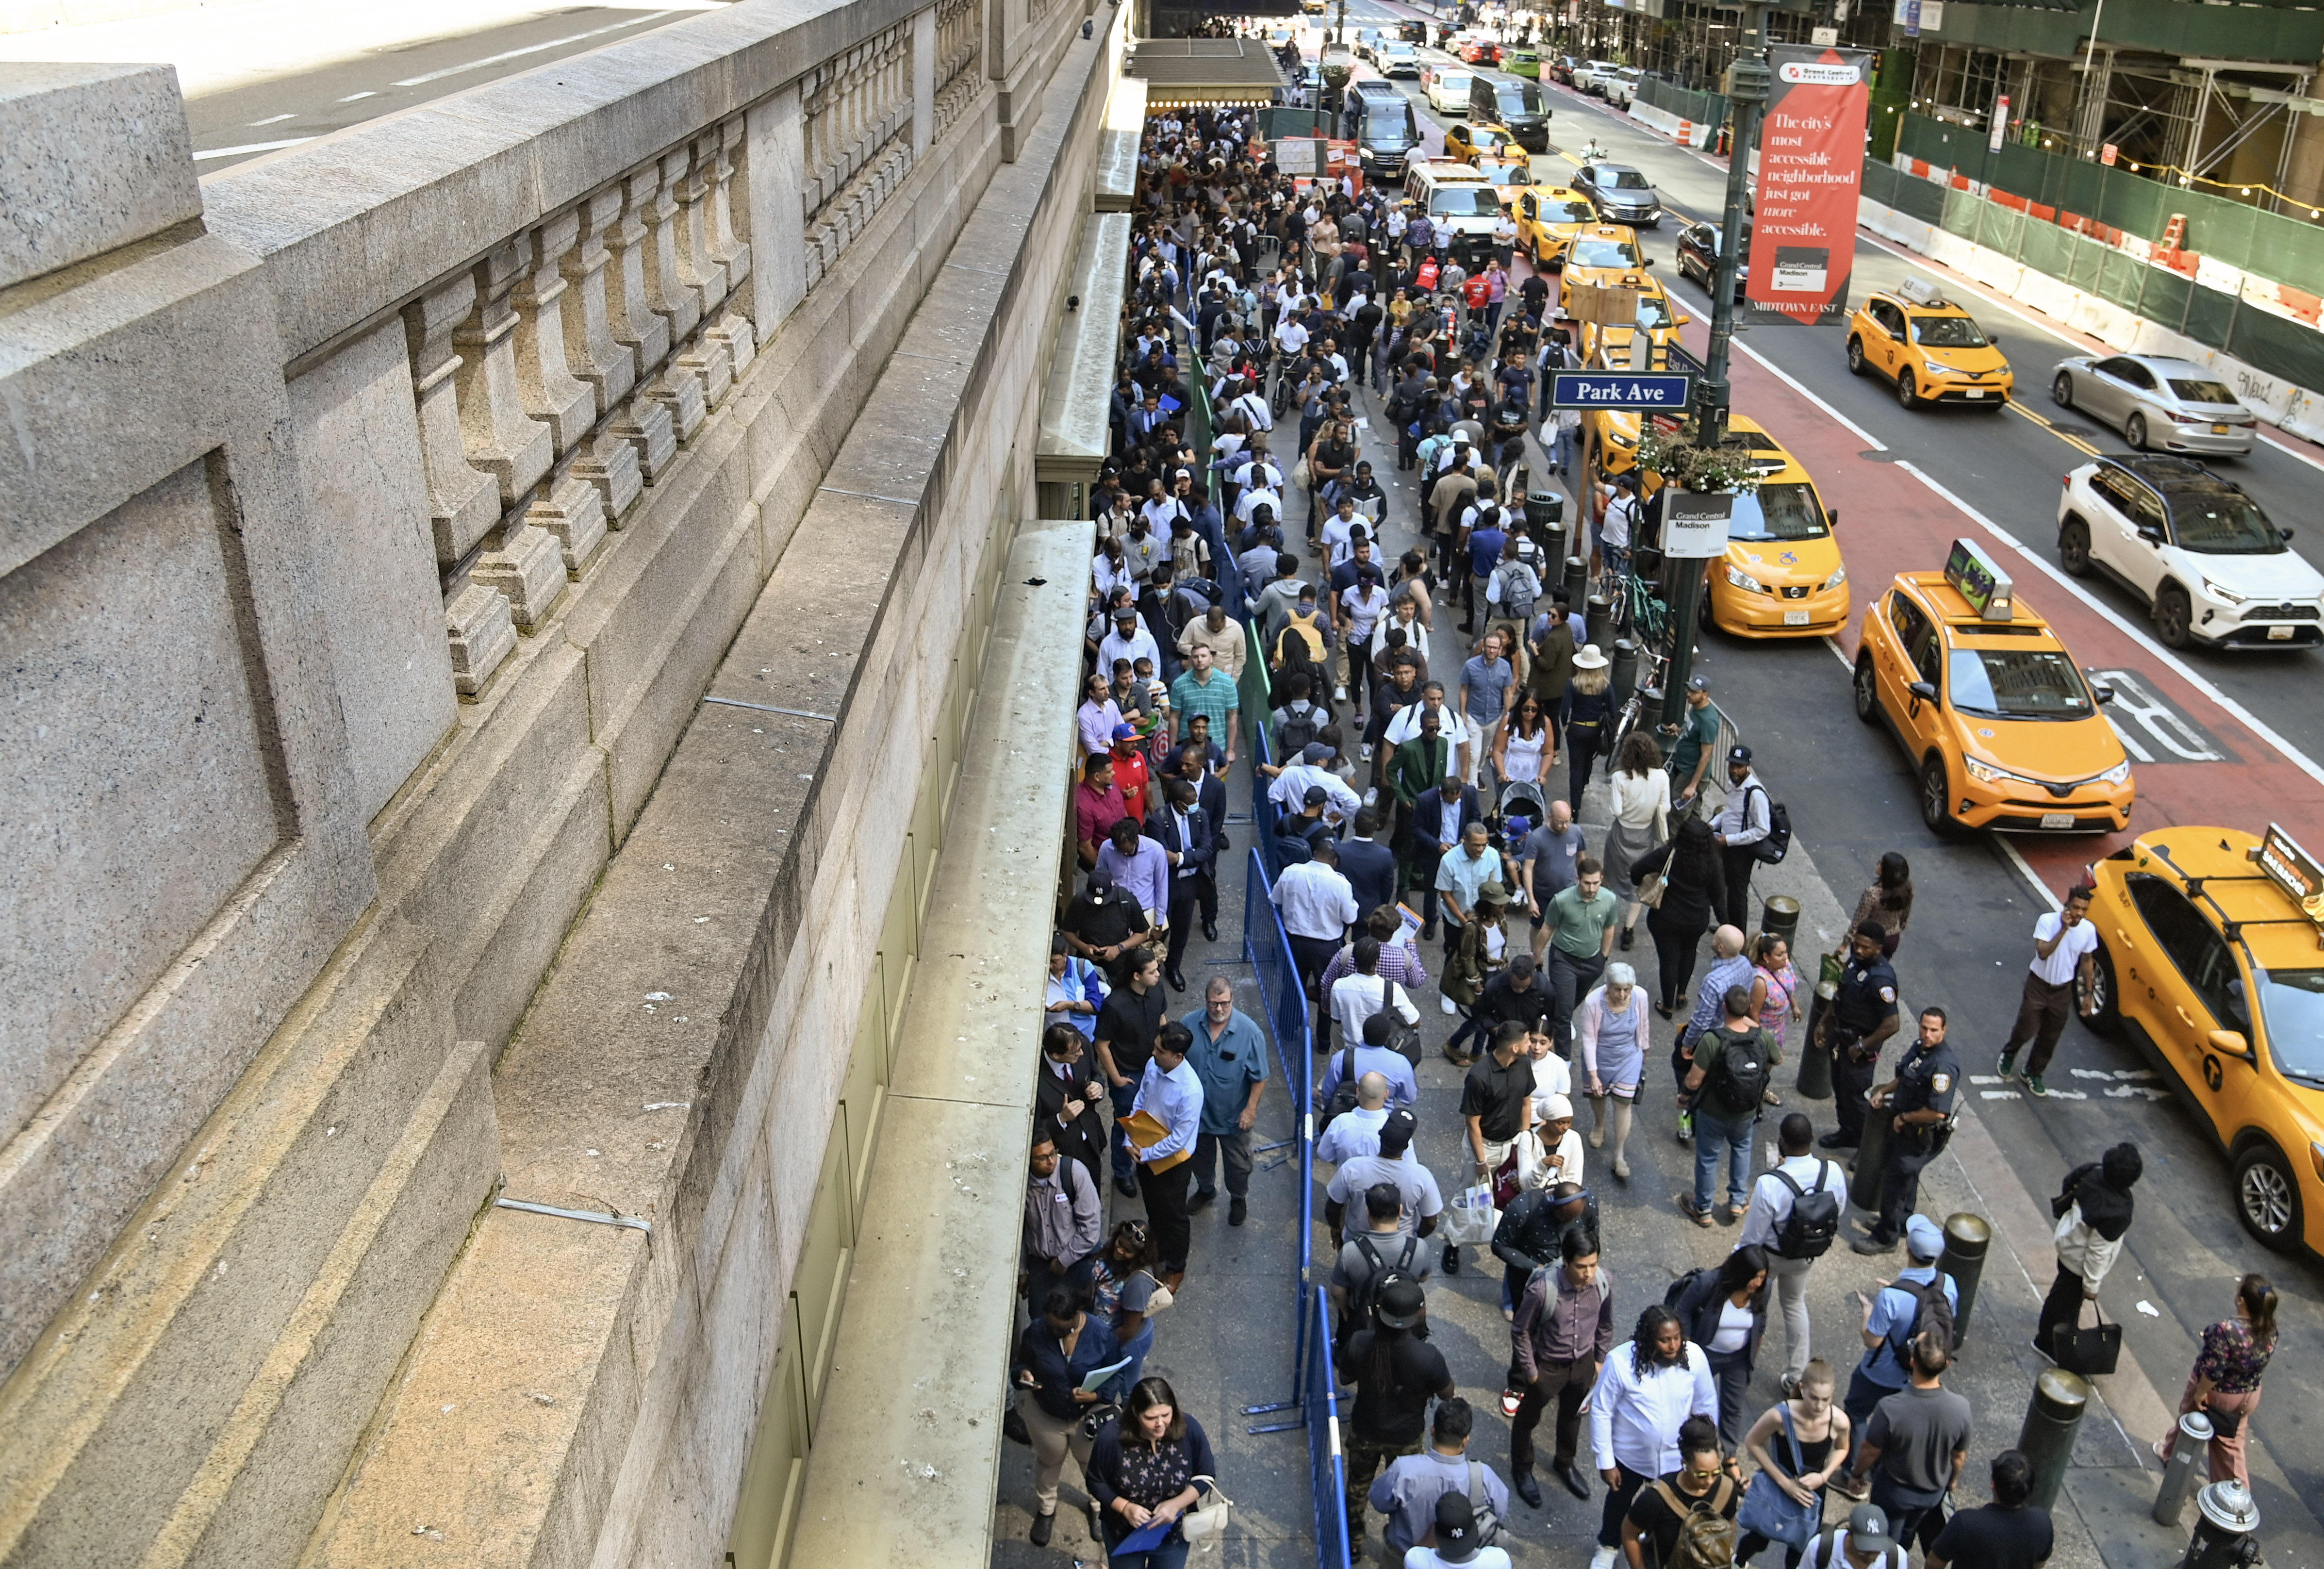 MTA Announces Thousands of Job Openings at Pop-Up Fair at Grand Central Terminal